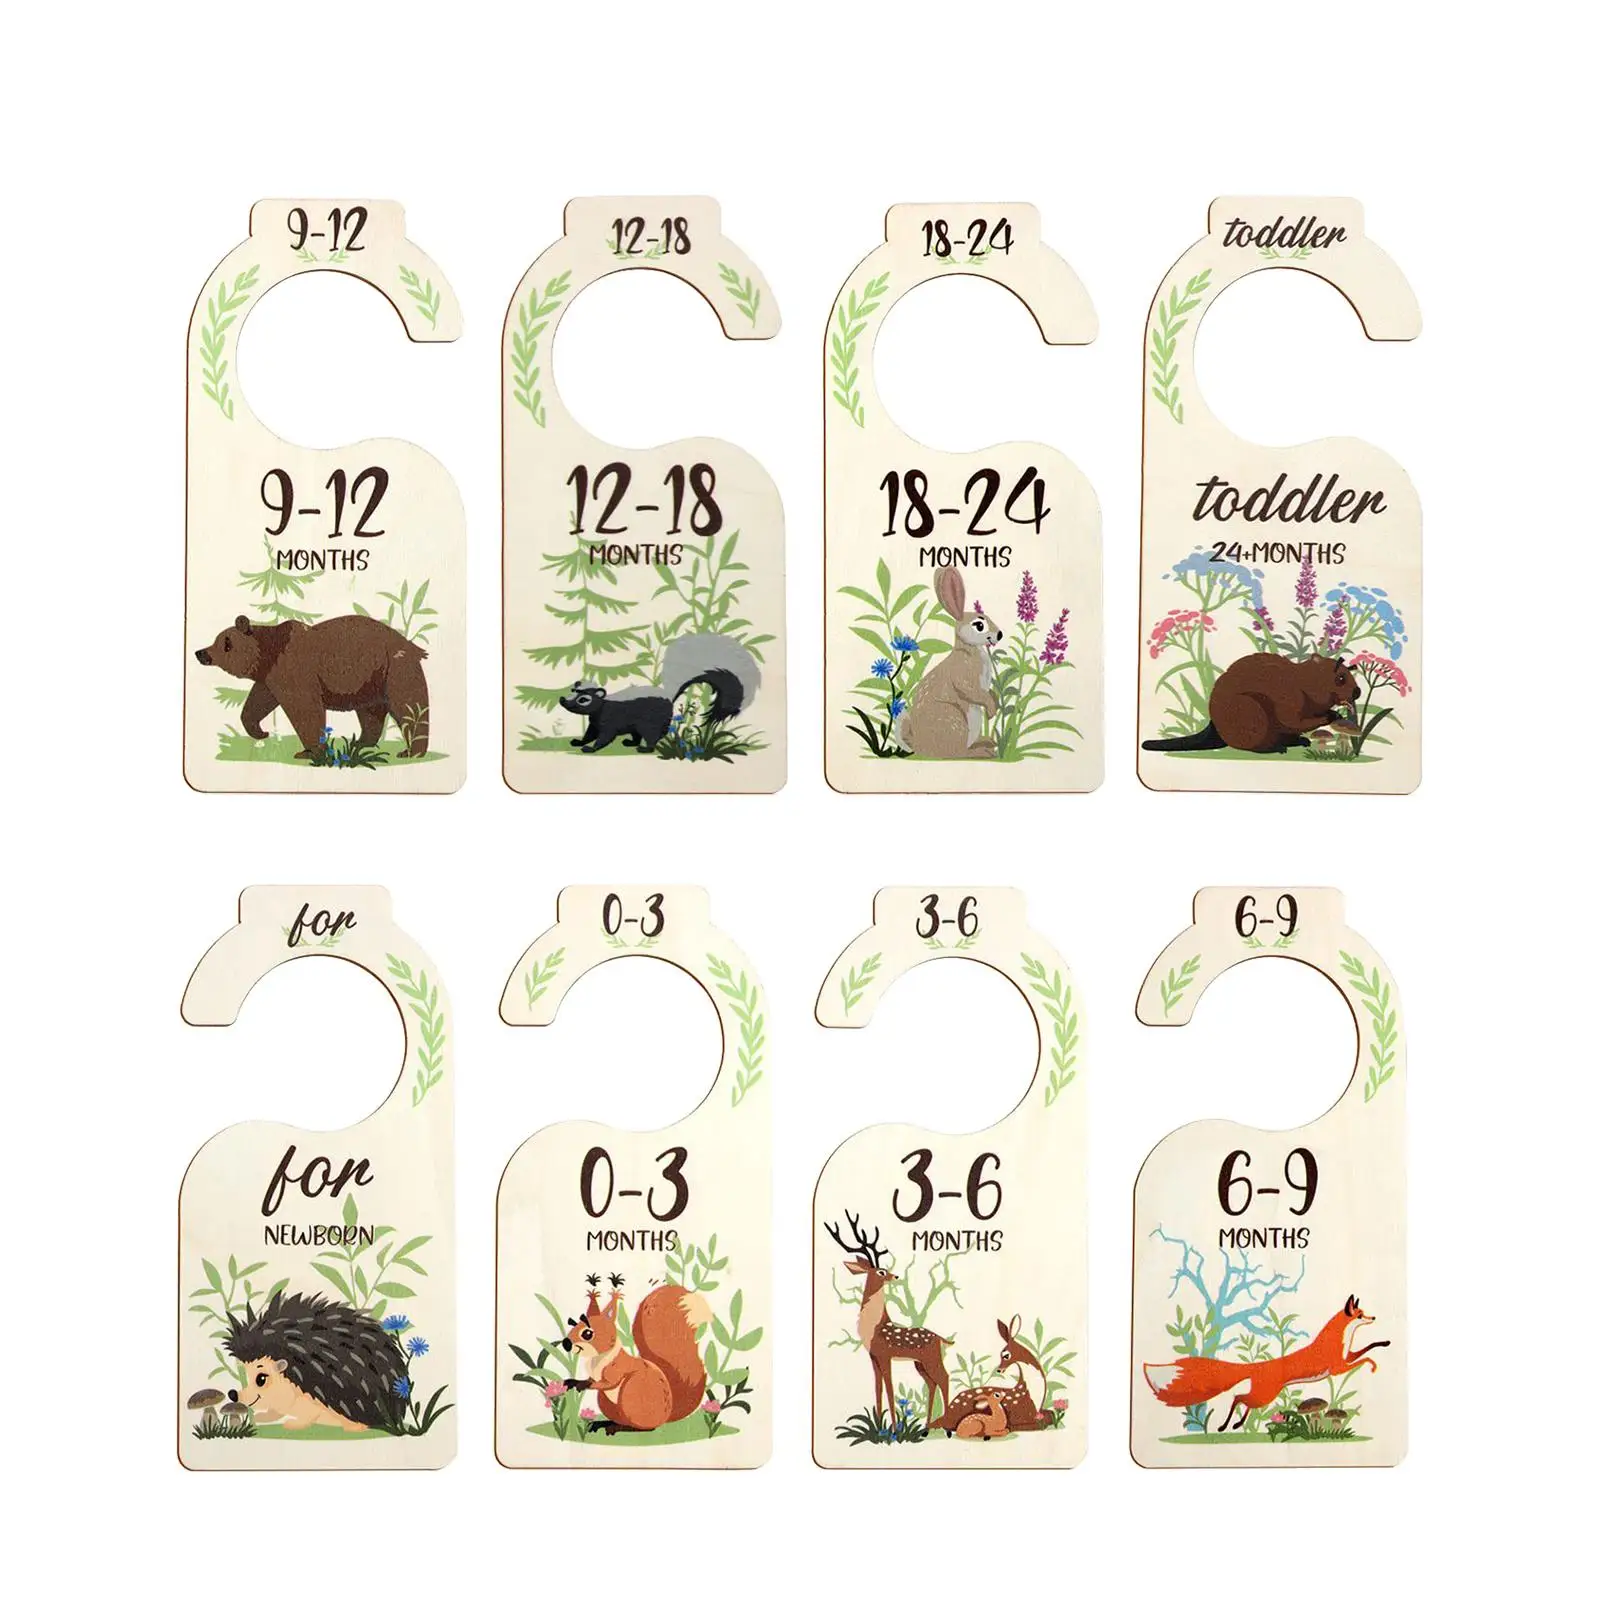 8 Pieces Baby Closet Dividers Baby Clothing Size Age Dividers Wood from Newborn to 24 Months for Home Wardrobe Bedroom Babies